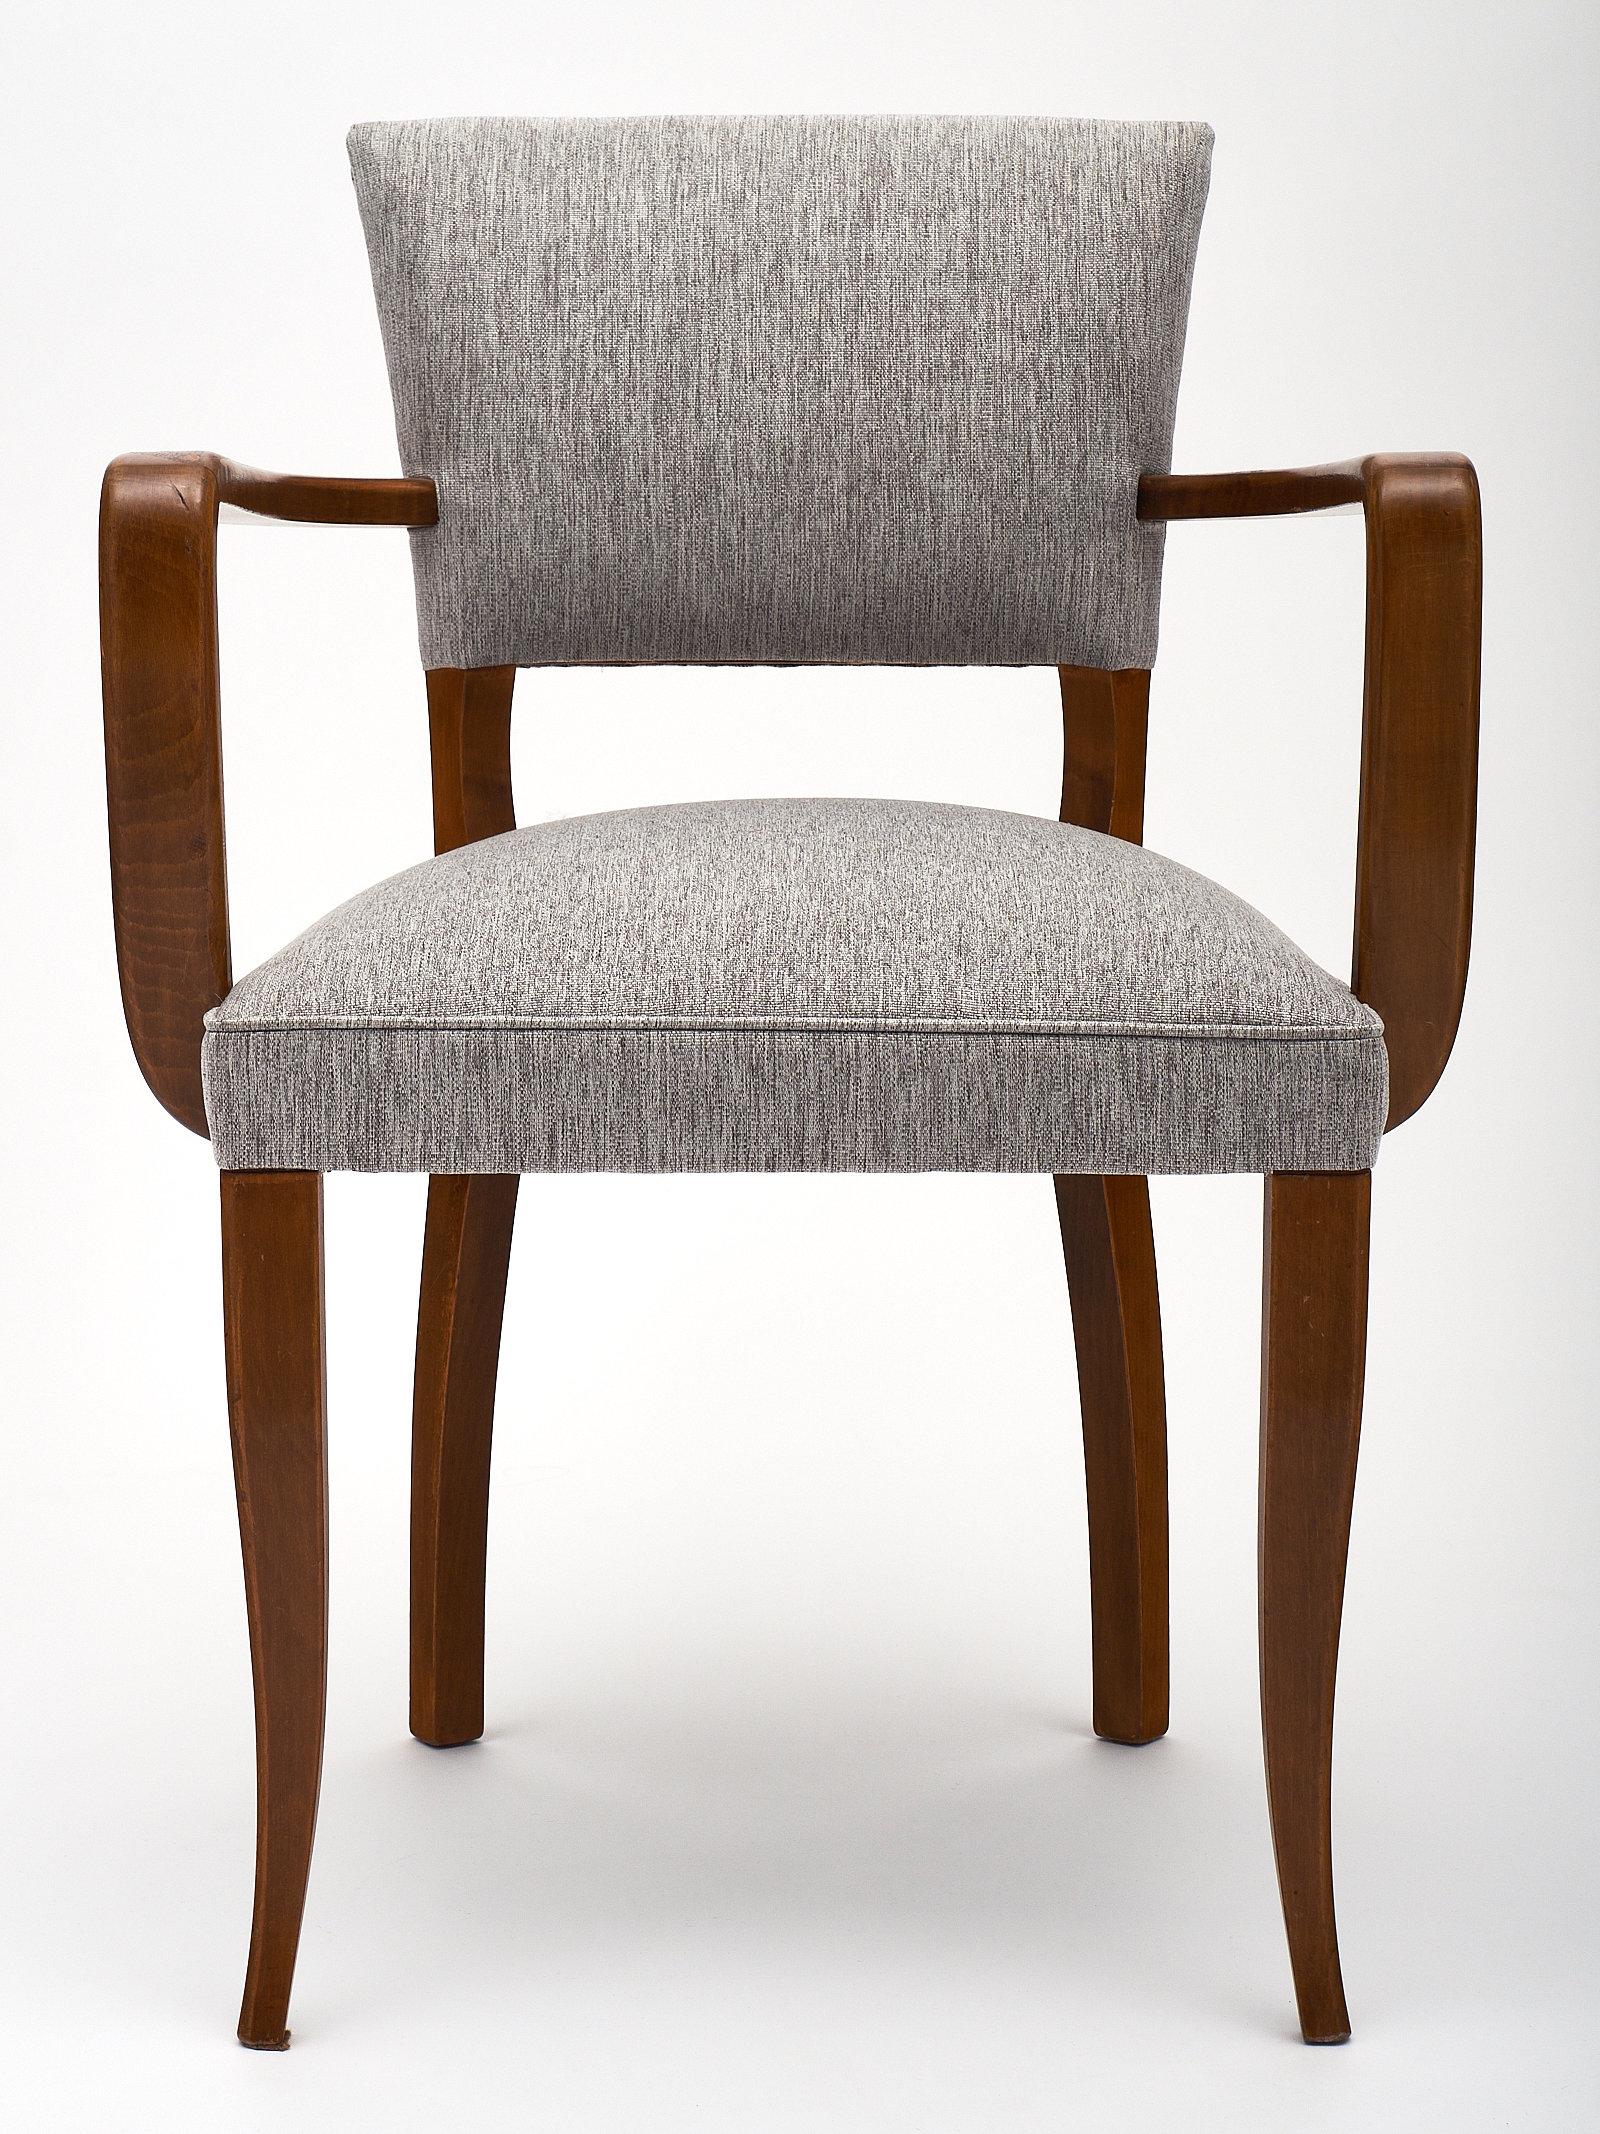 A set of eight French Art Deco bridge chairs made of walnut and newly upholstered in a grey linen blend. We love the attention to detail in the curved wood arms and saber legs. Elegant and versatile, these are indispensable features in your modern